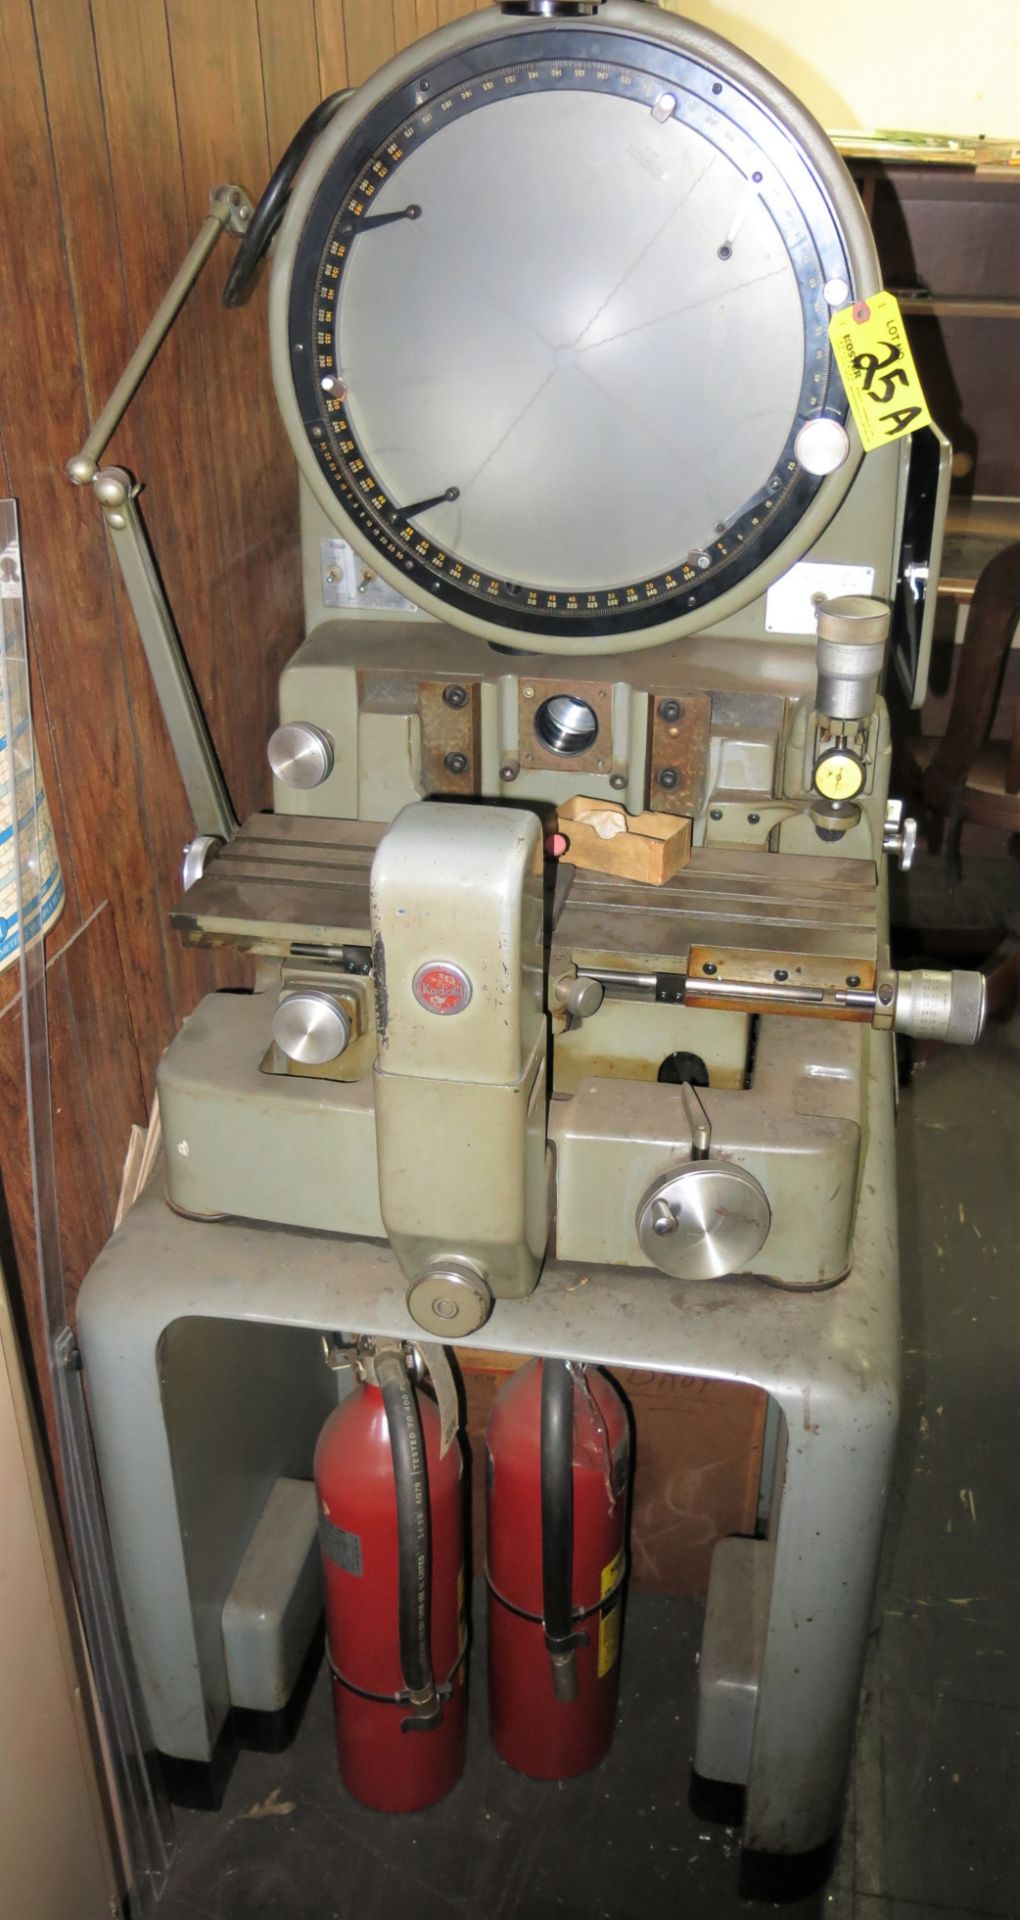 (1) KODAK MDL. 74-2A OPTICAL COMPARATOR WITH 10X,20X,50X, 100X LENSES, BULBS, AND FIXTURES